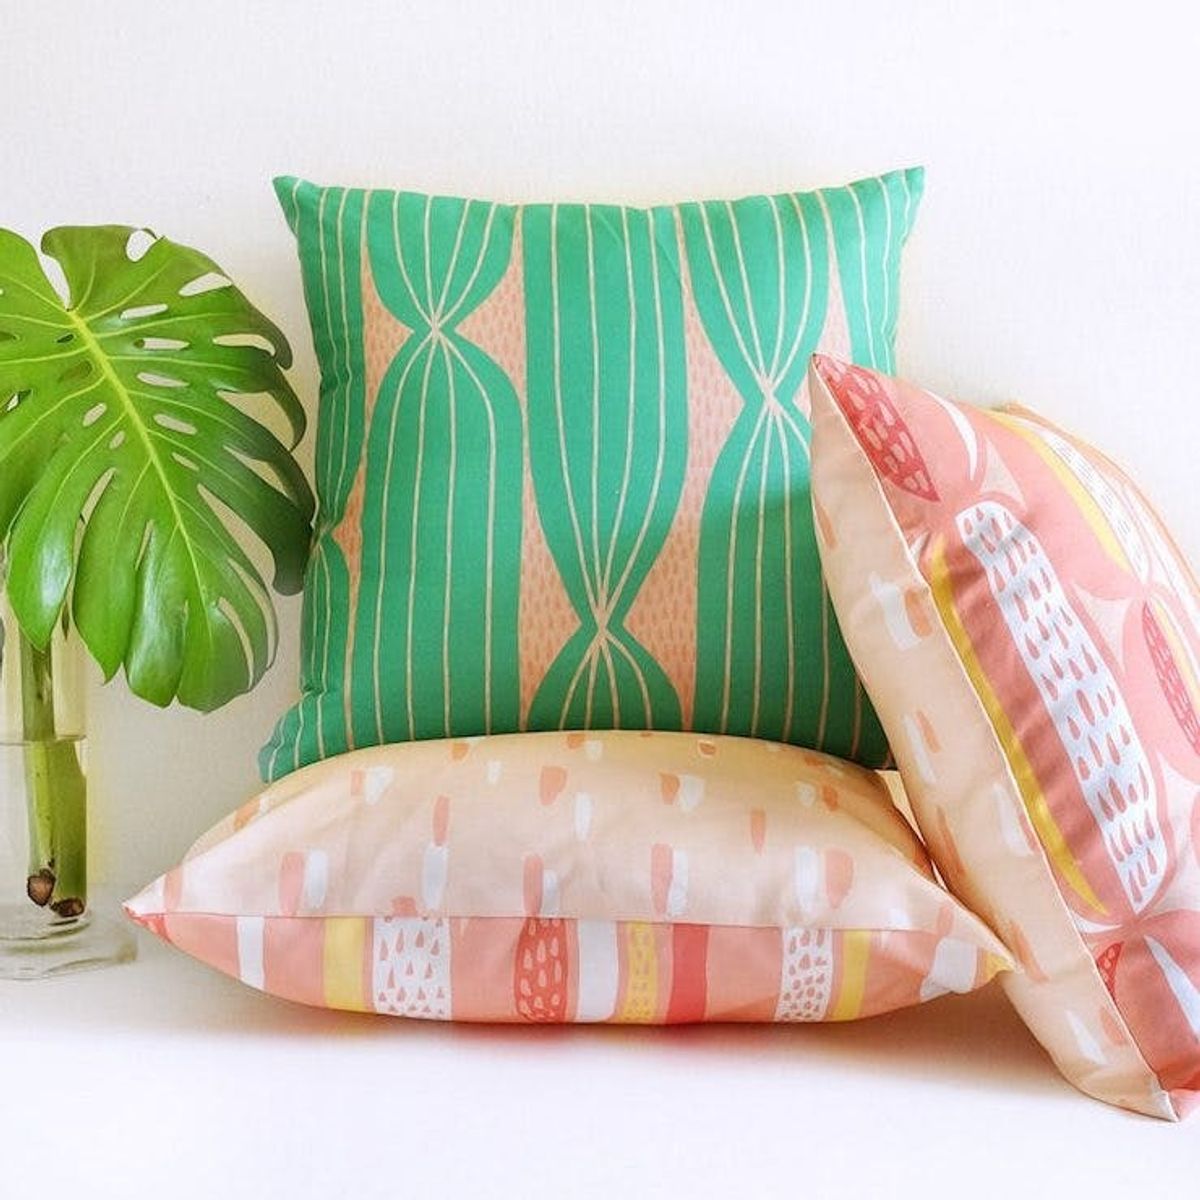 17 Dorm Room Essentials You Can Find on Etsy